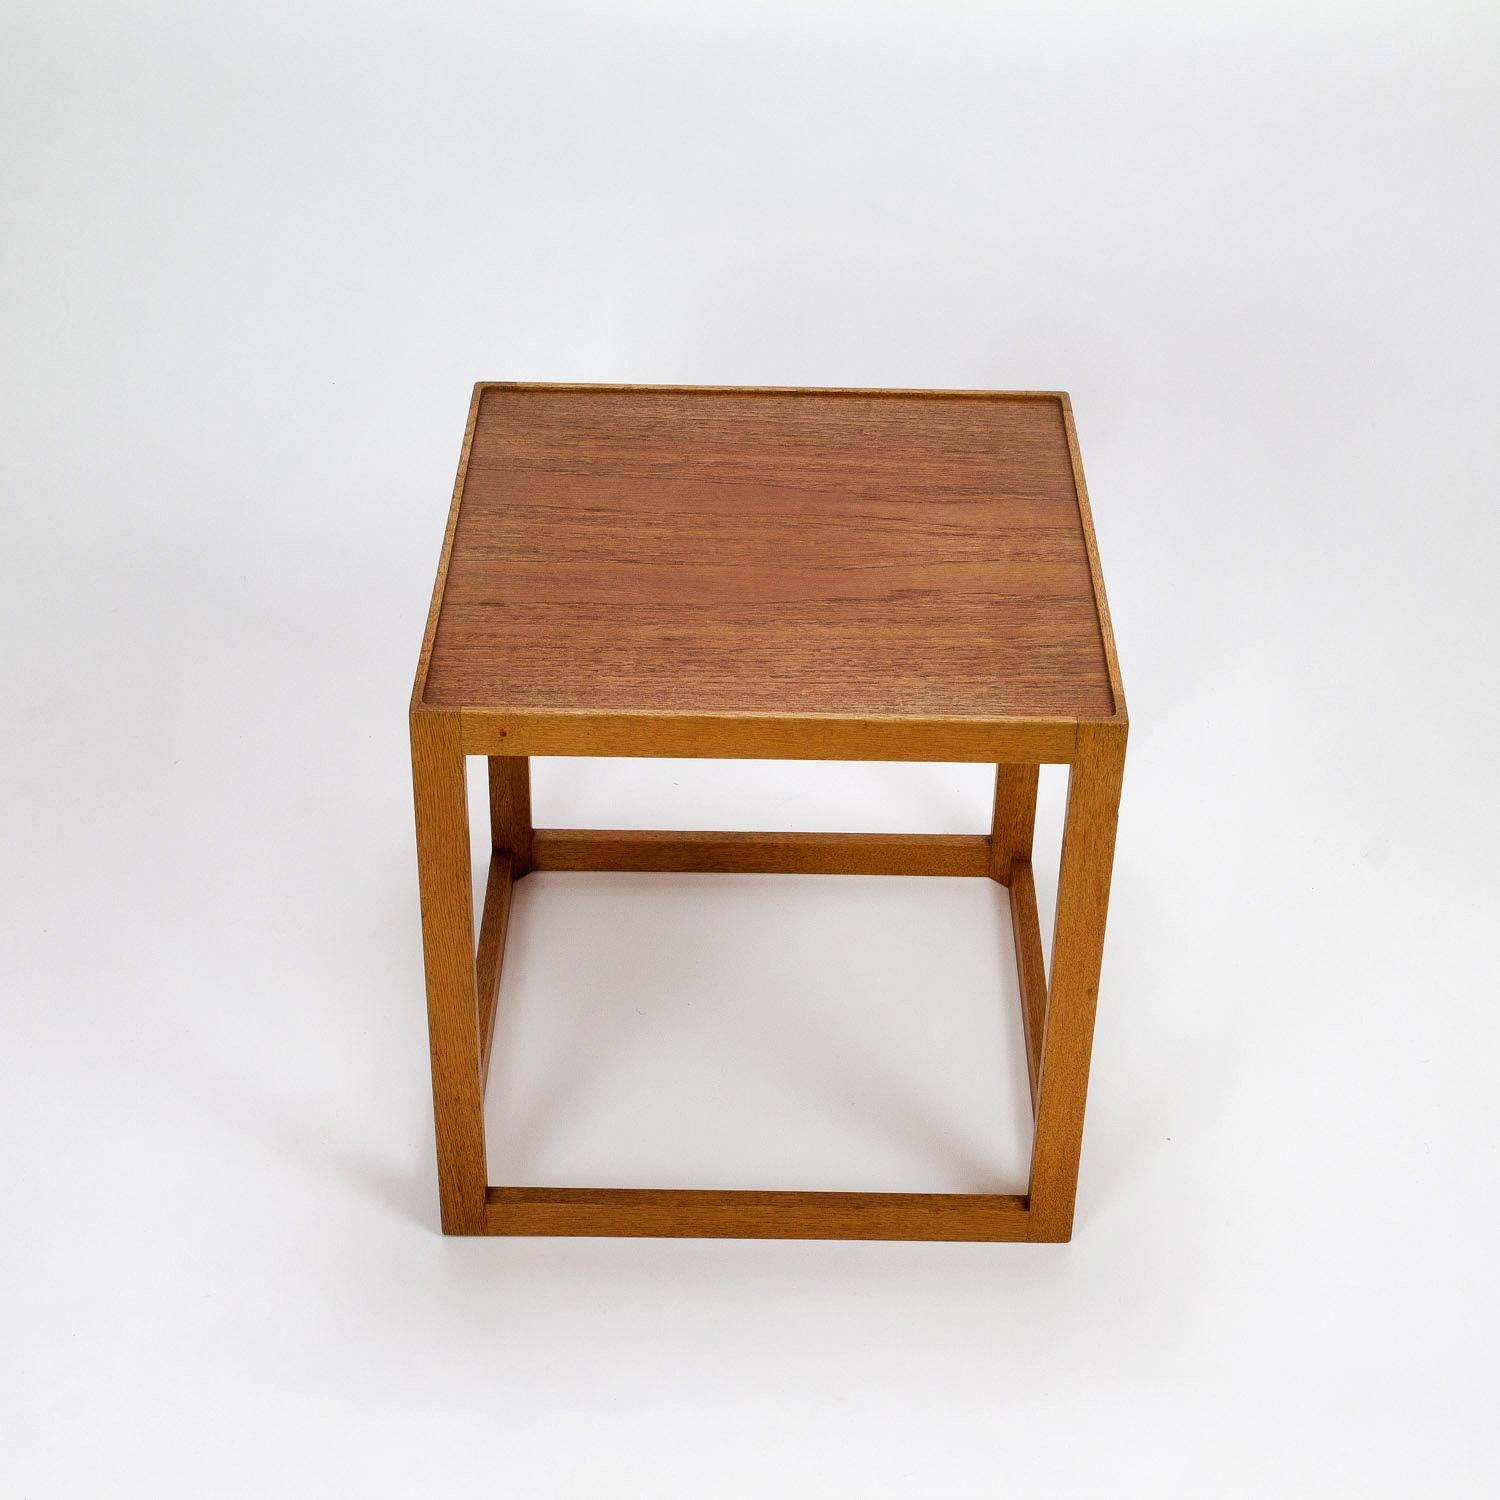 A very rare midcentury Kurt Østervig cube side table in solid oak with laminated teak top made by cabinetmaker Børge Bak, Denmark, 1950s.